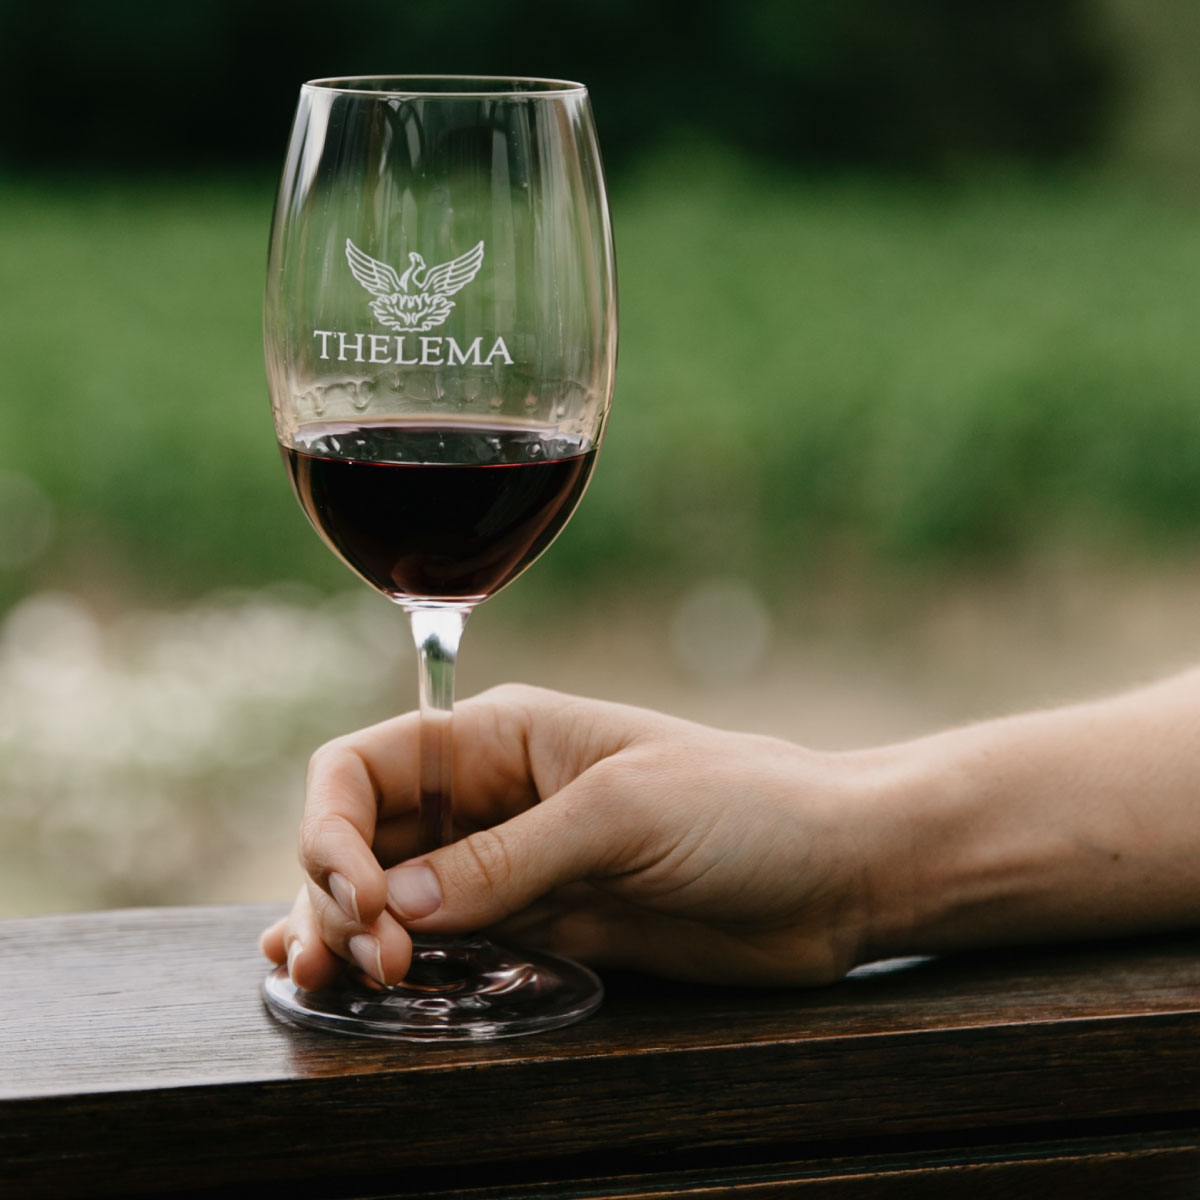 🍷🌀 Sip and swirl your way through Stellenbosch, South Africa! Sample a line up of Thelema Mountain stunners on May 28th! Call us or sign up at bit.ly/3JzrZCO

#SouthAfricanVineyards #ThelemaWines #WineTasting #StellenboschWines #WinerySpotlight @ThelemaWines